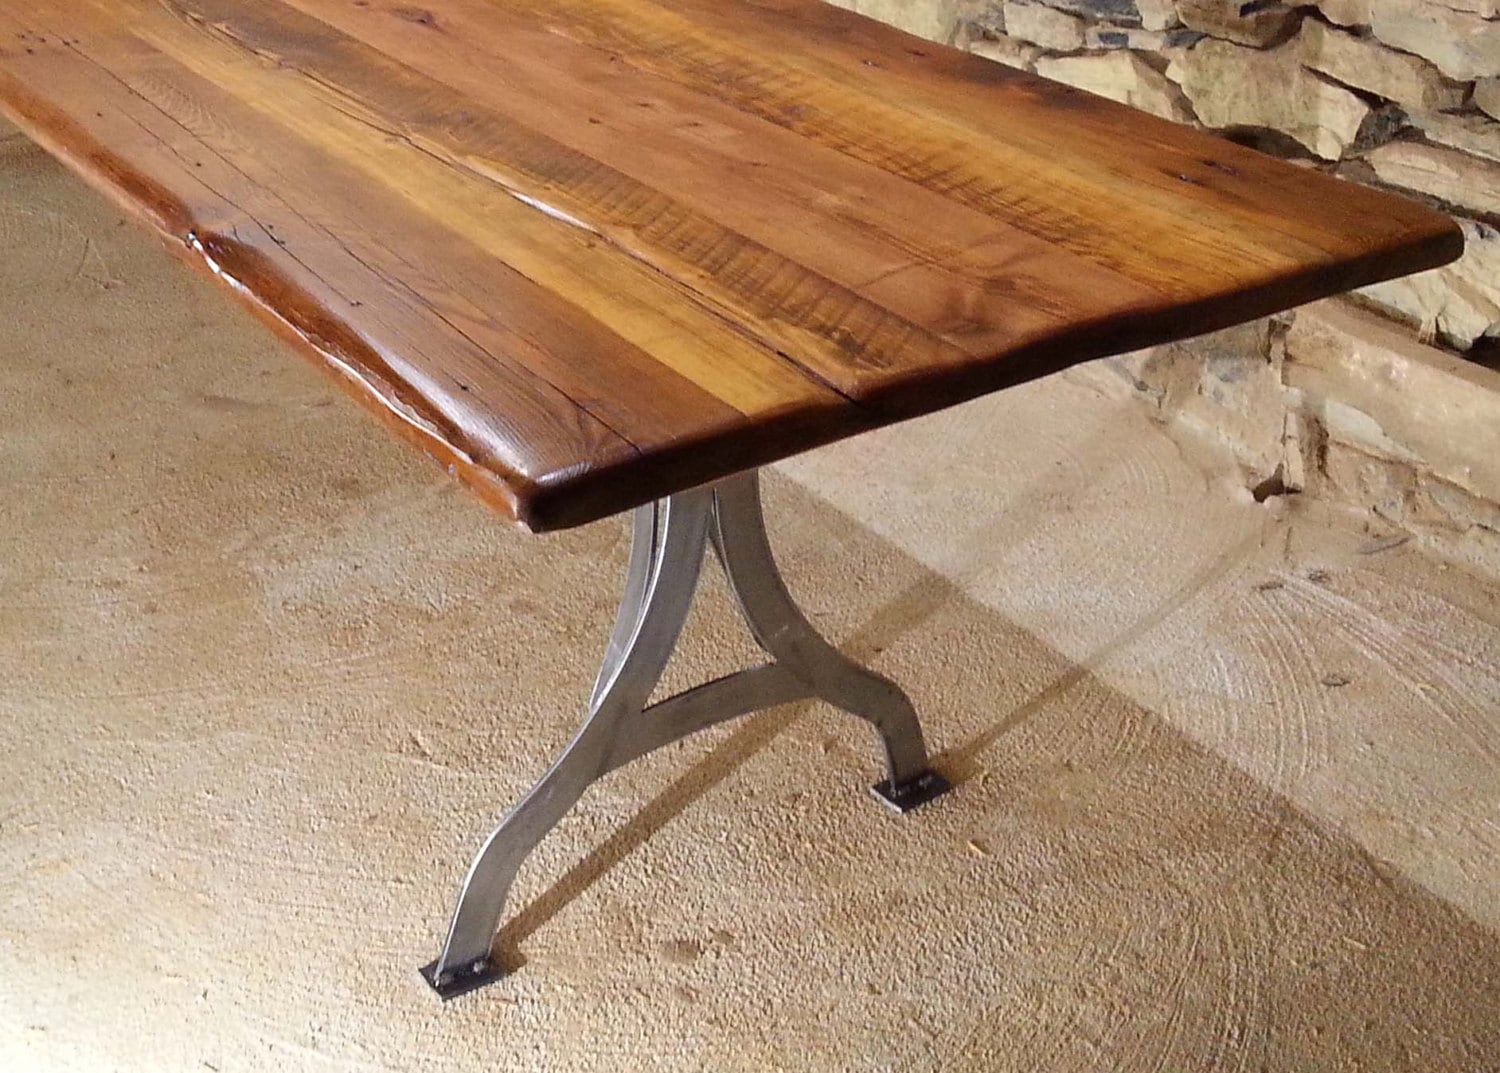 Reclaimed Conference Table - Heart Pine Table - Viking Furniture Table